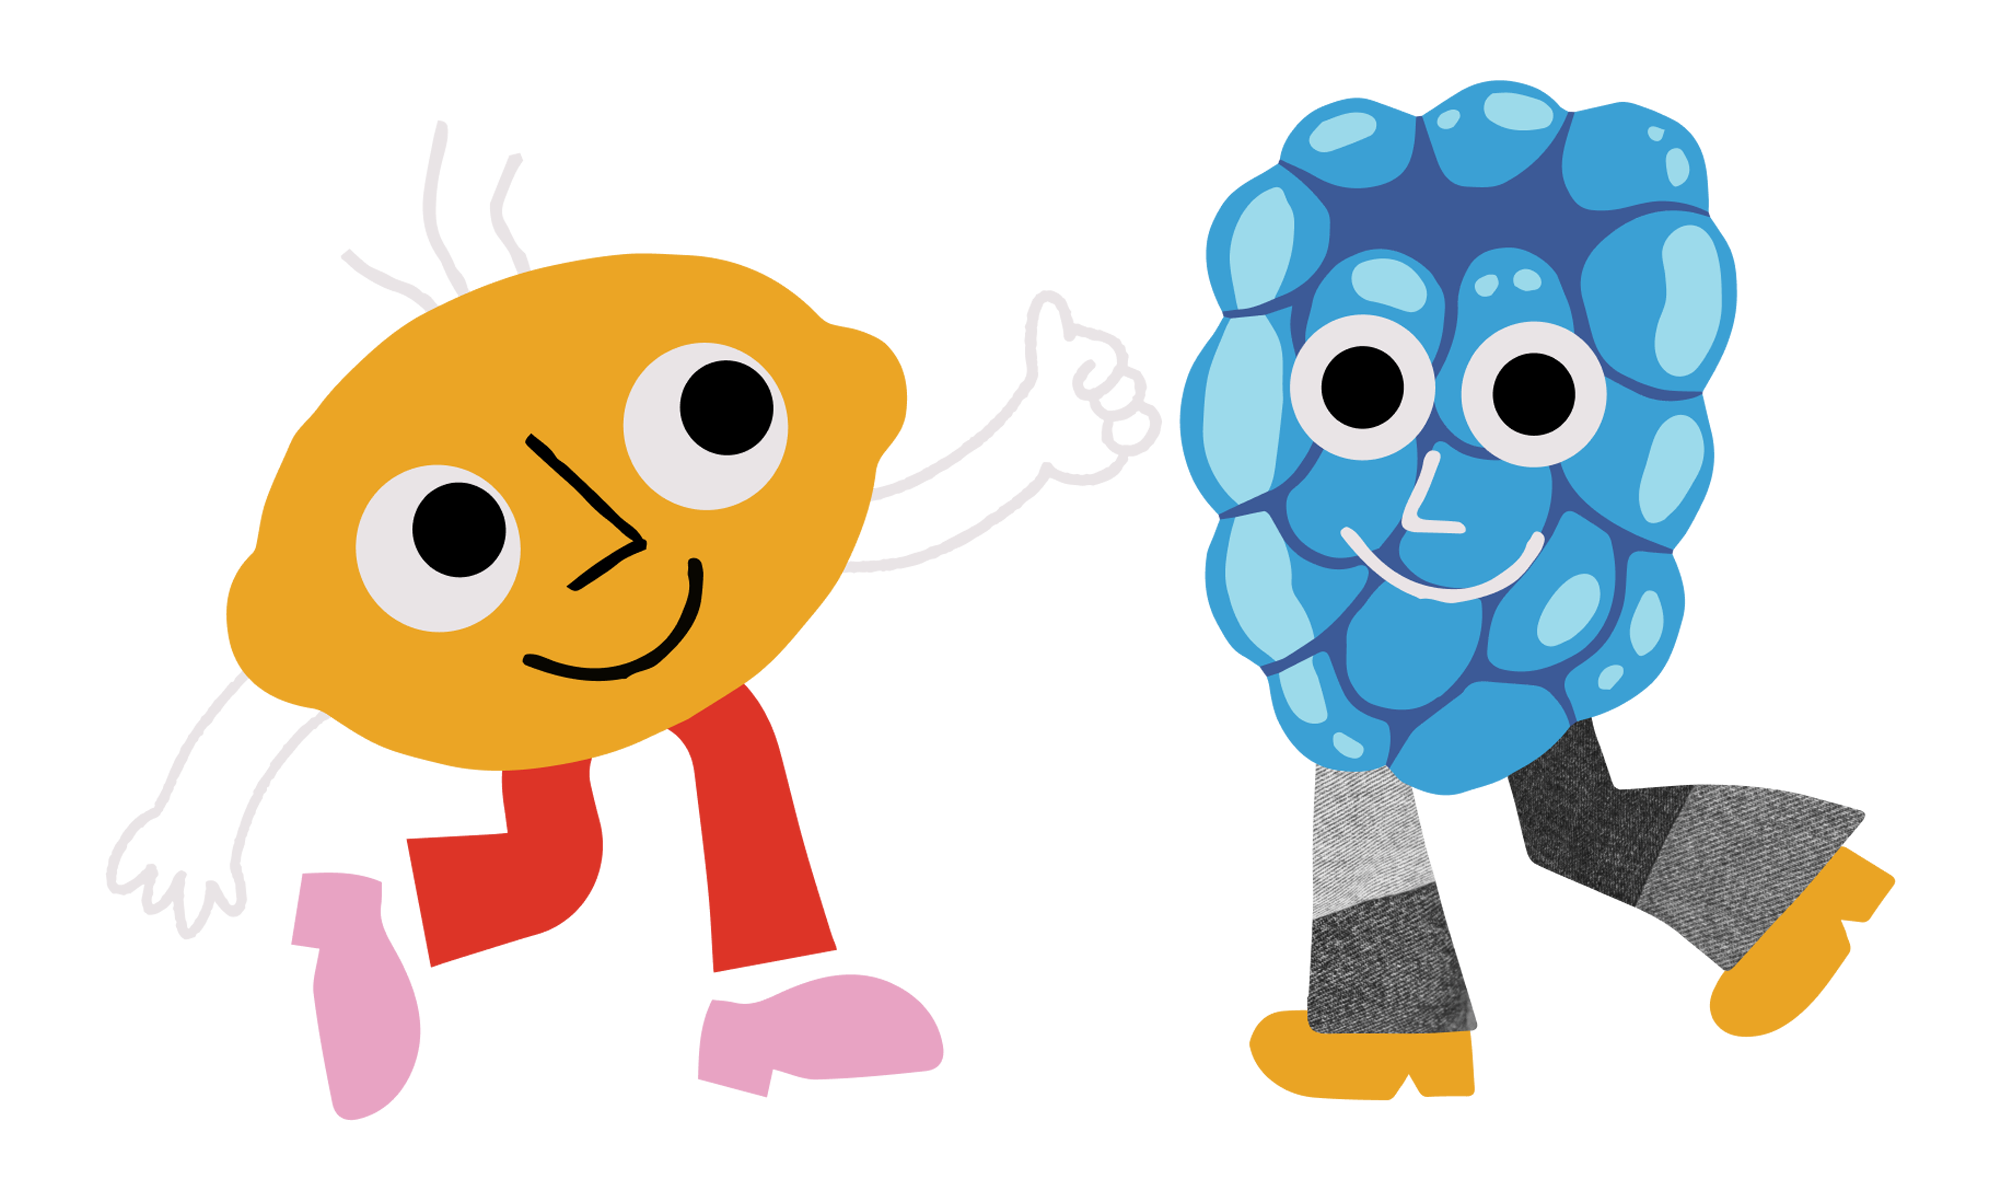 Cute lemon and blue raspberry sticker. The lemon is giving a thumbs up and smiling at the blue raspberry. the blue raspberry is smiling at the camera. They're both wearing pants and shoes.